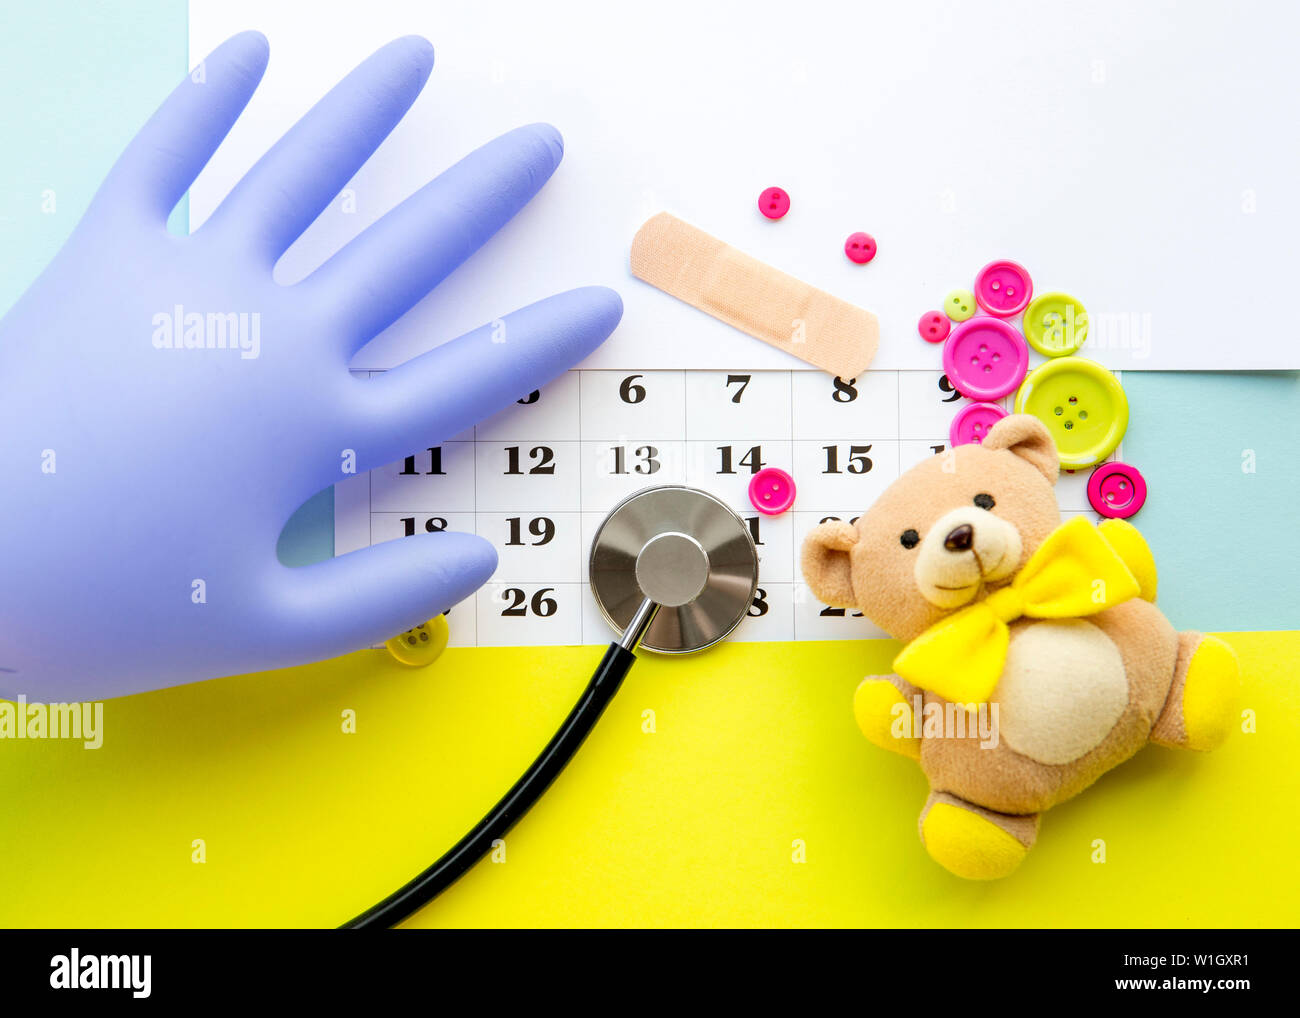 Children`s doctor appointment date number concept. Calendar with numbers, doctor, kids toys, pink and green buttons. Flat lay view. Stock Photo